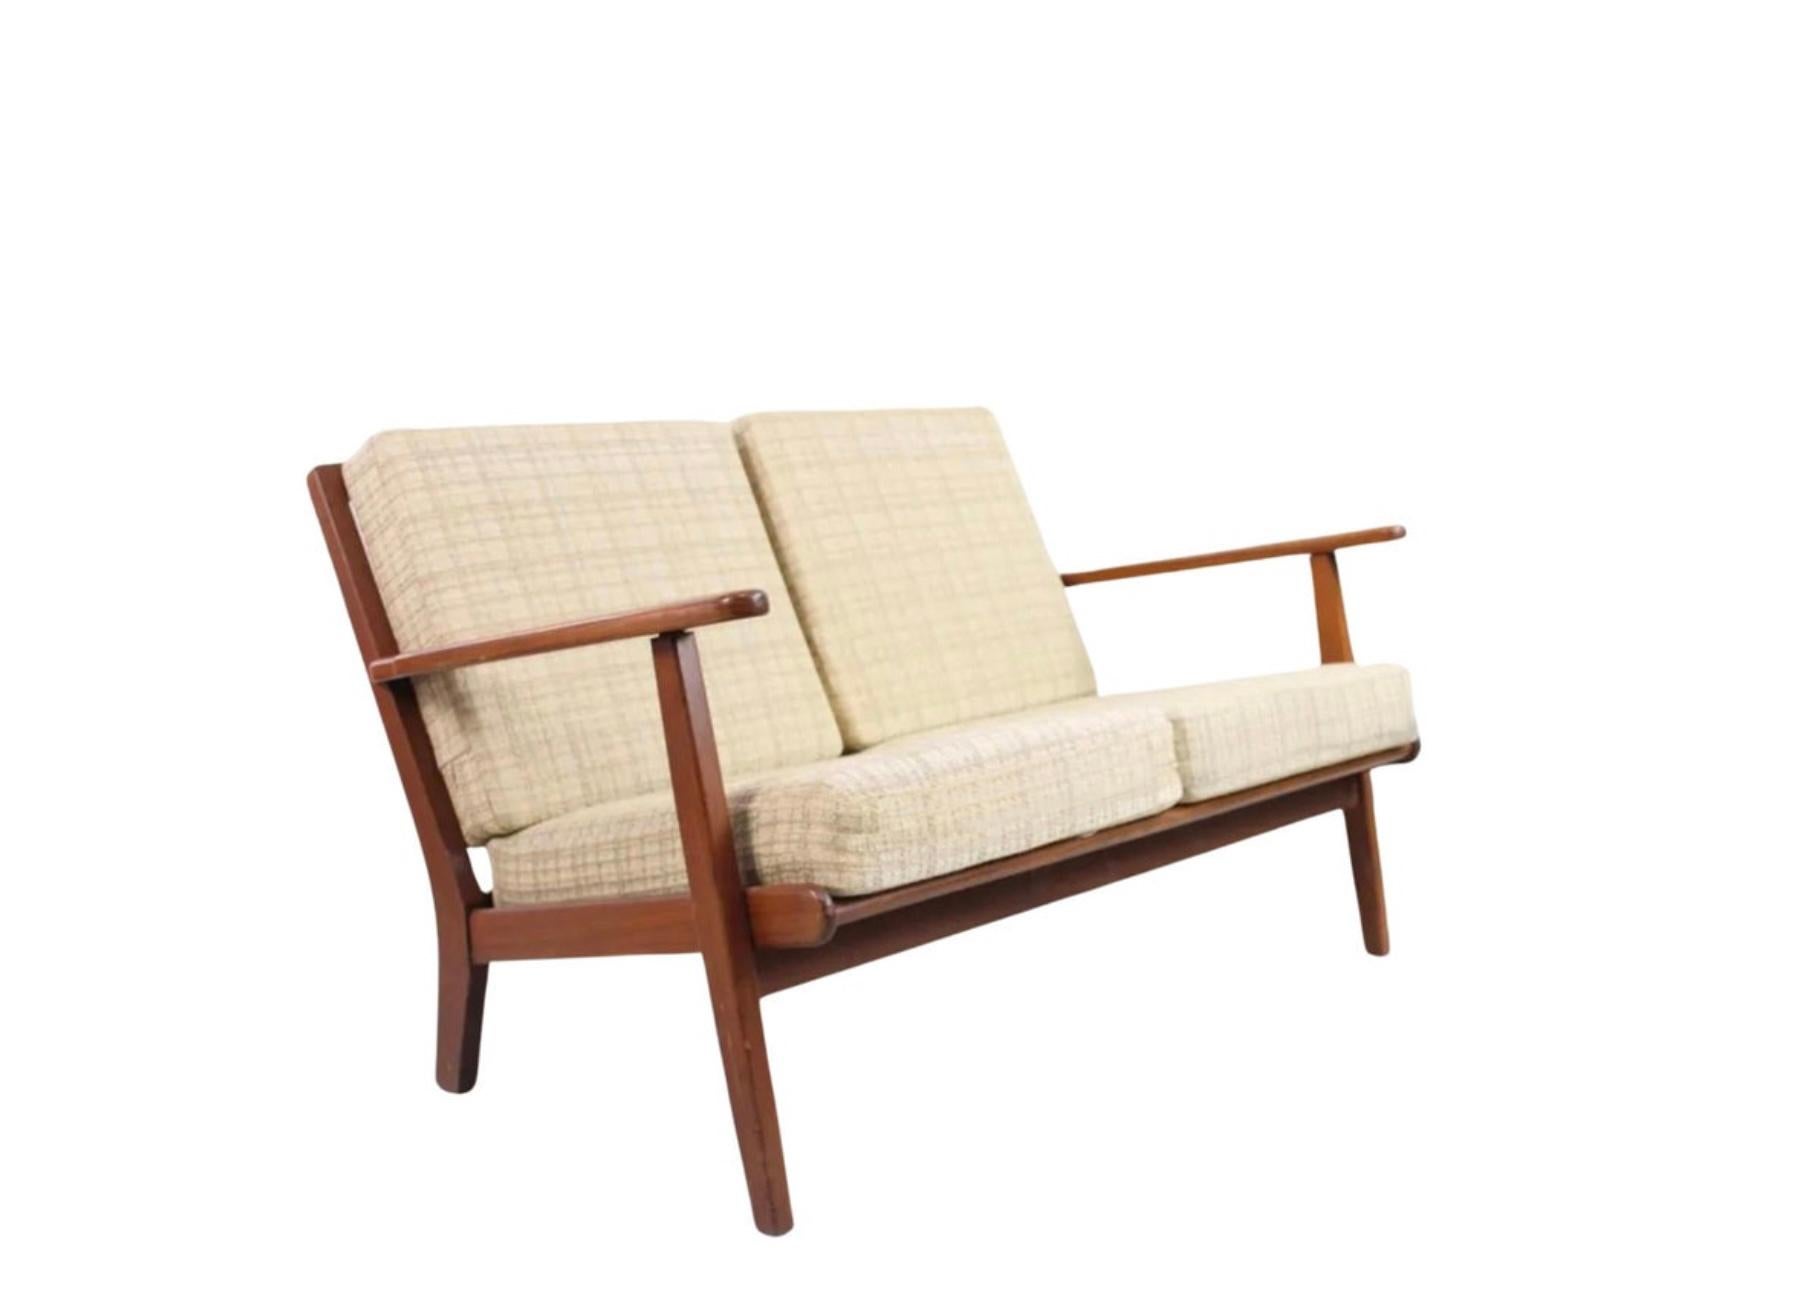 Danish Modern 2-Seat Sofa by Aage Petersen for Getama Model number GE88. This 2-seat sofa couch has a minimalist teak frame with angled back legs and slat wood backside. Has oatmeal colored plaid fabric cushions. Designer Aage Petersen for Getama.